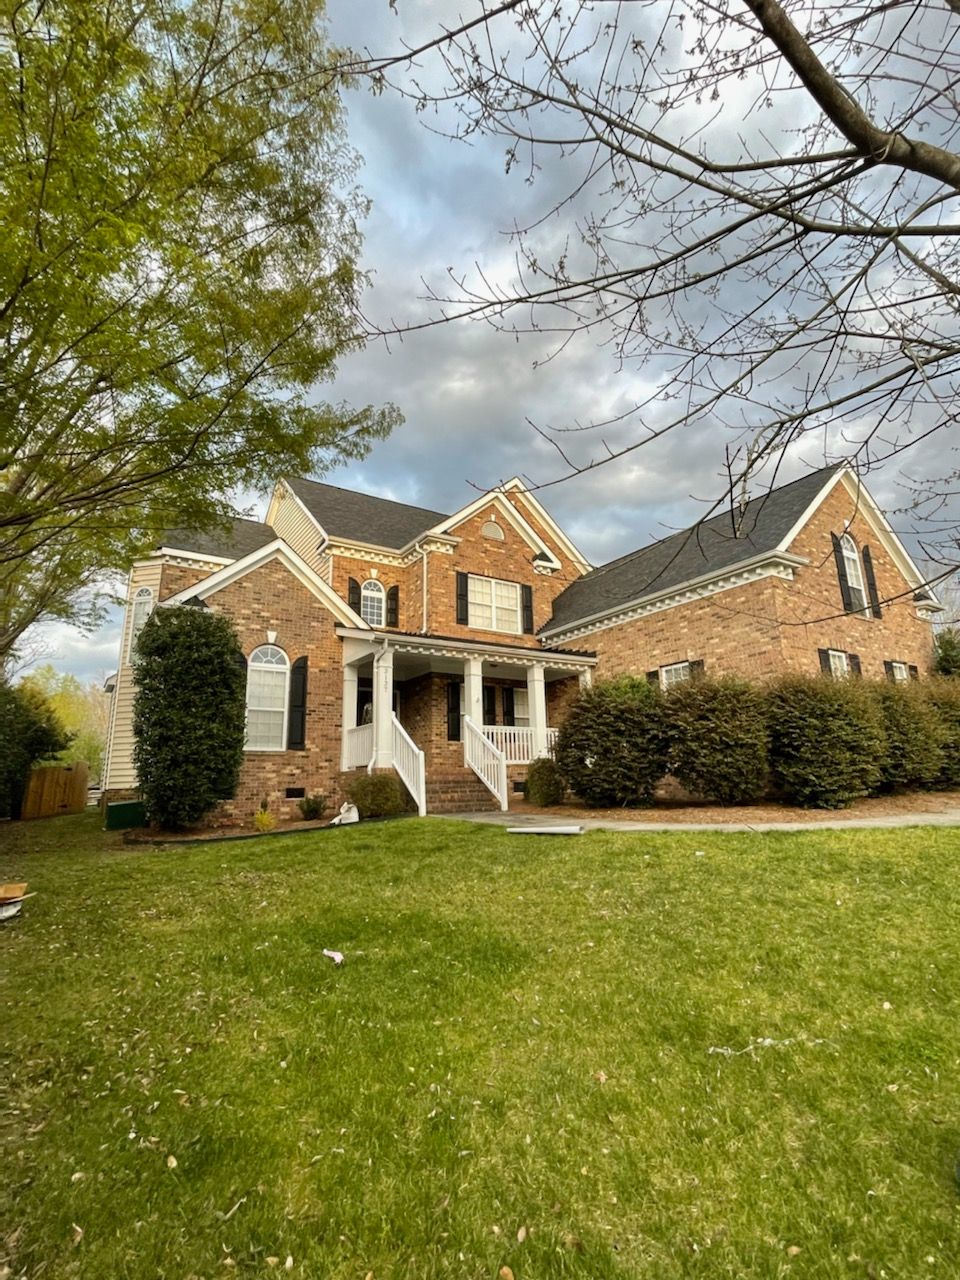 All Photos for Kingdom Roofing Services in Charlotte, NC